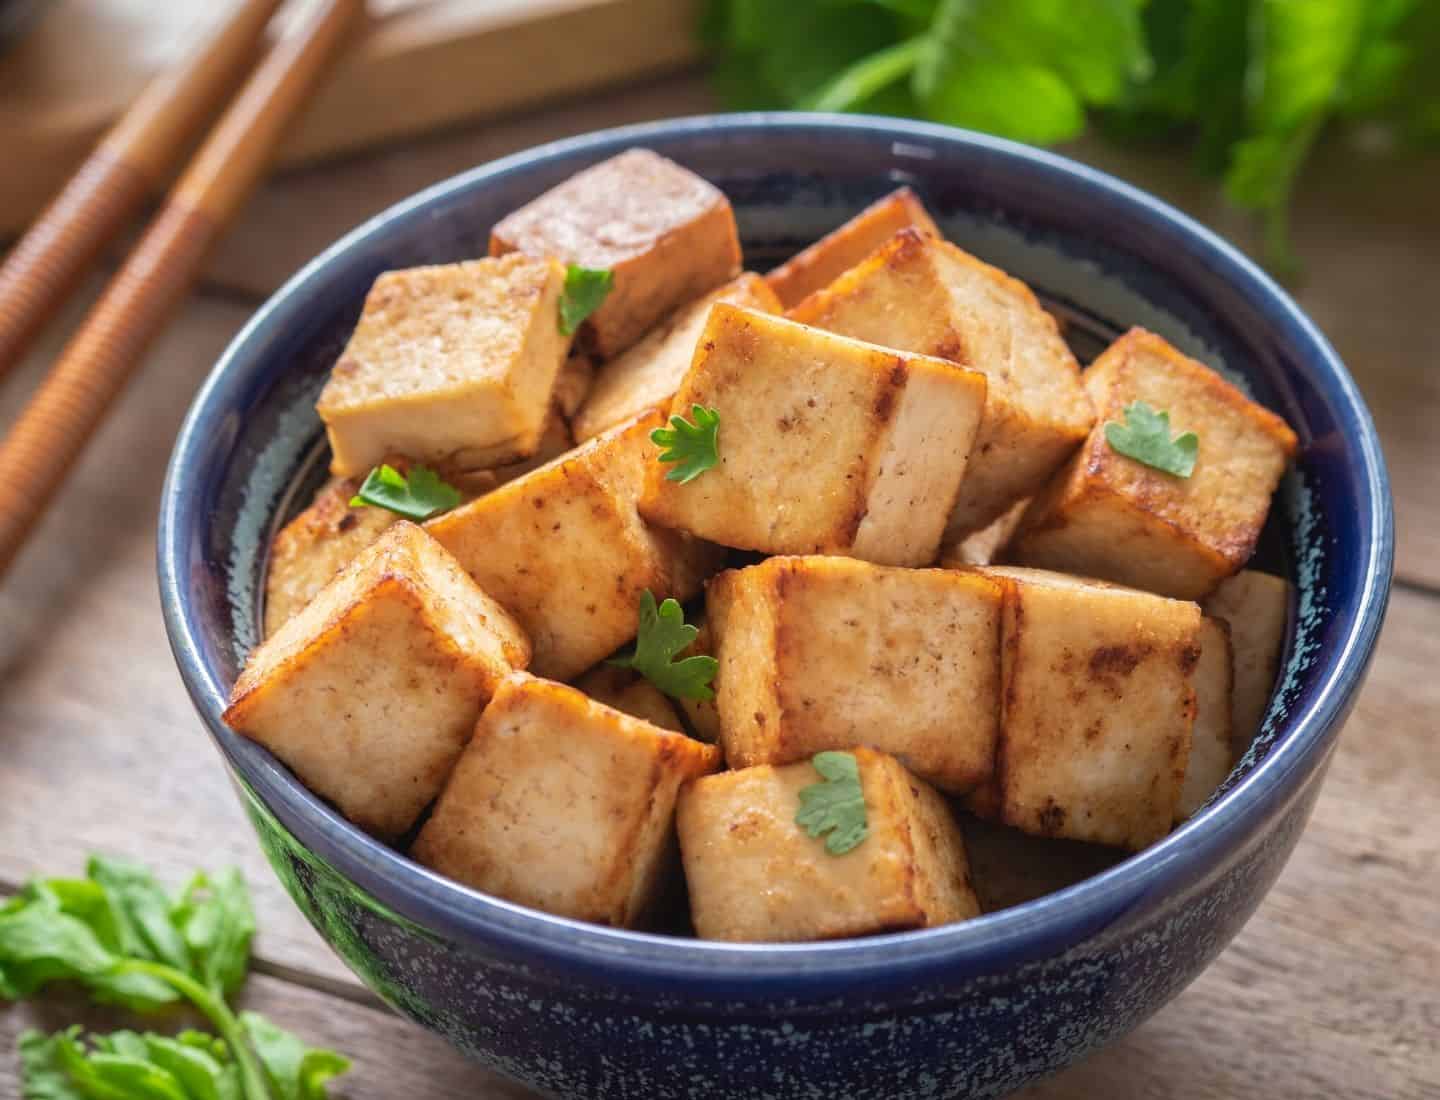 Browned chunks of tofu in a blue bowl with chopsticks in the background